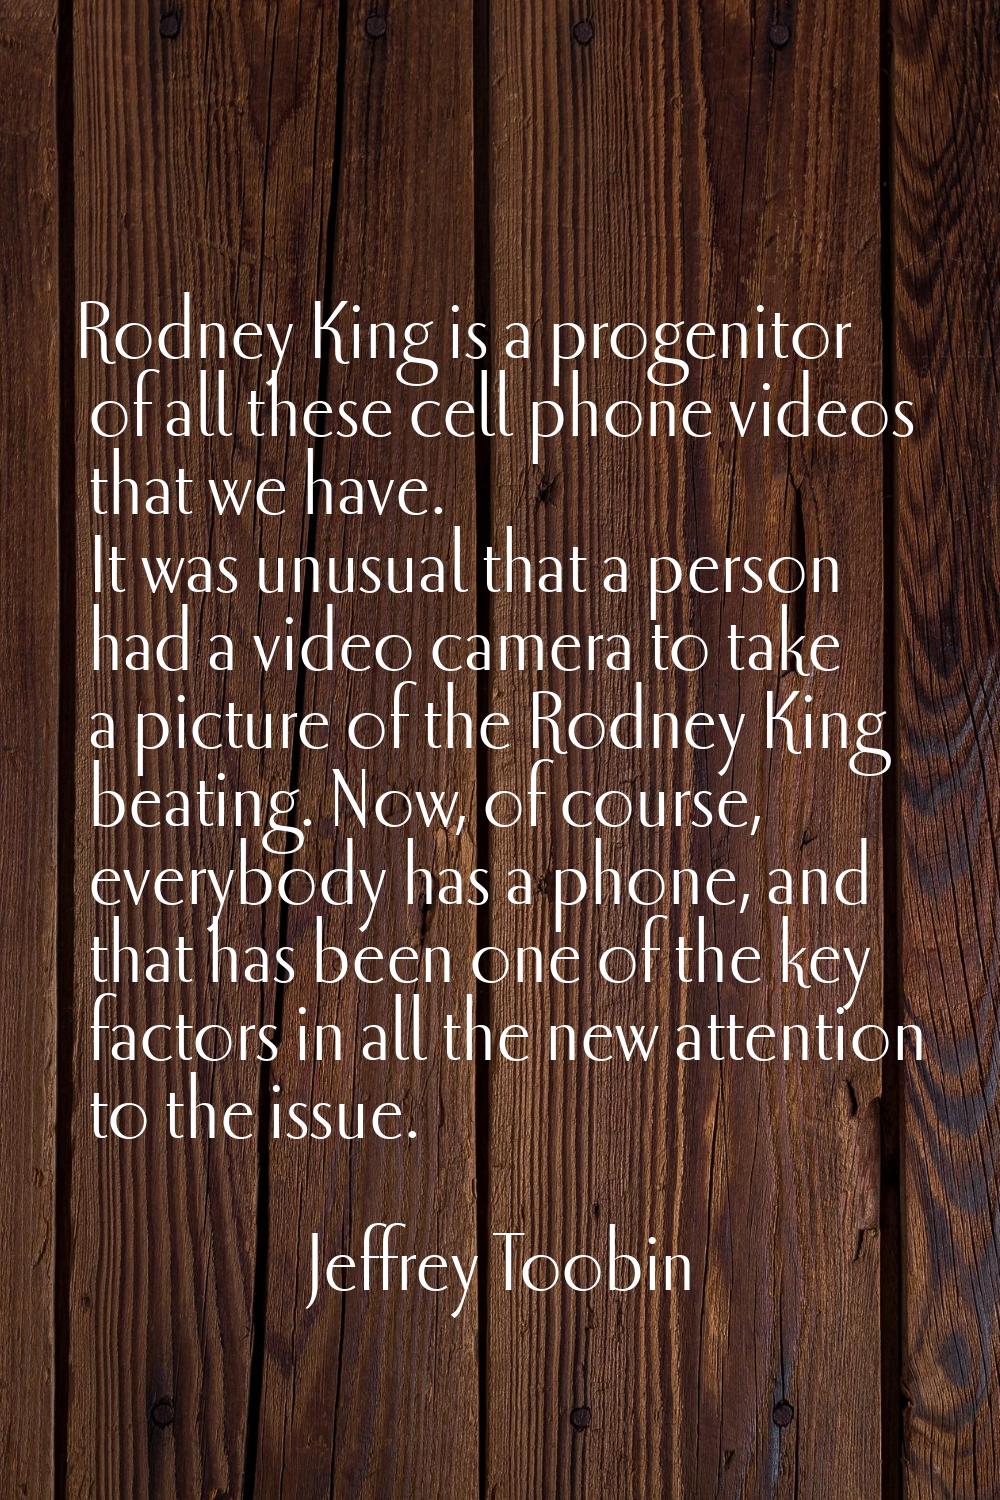 Rodney King is a progenitor of all these cell phone videos that we have. It was unusual that a pers